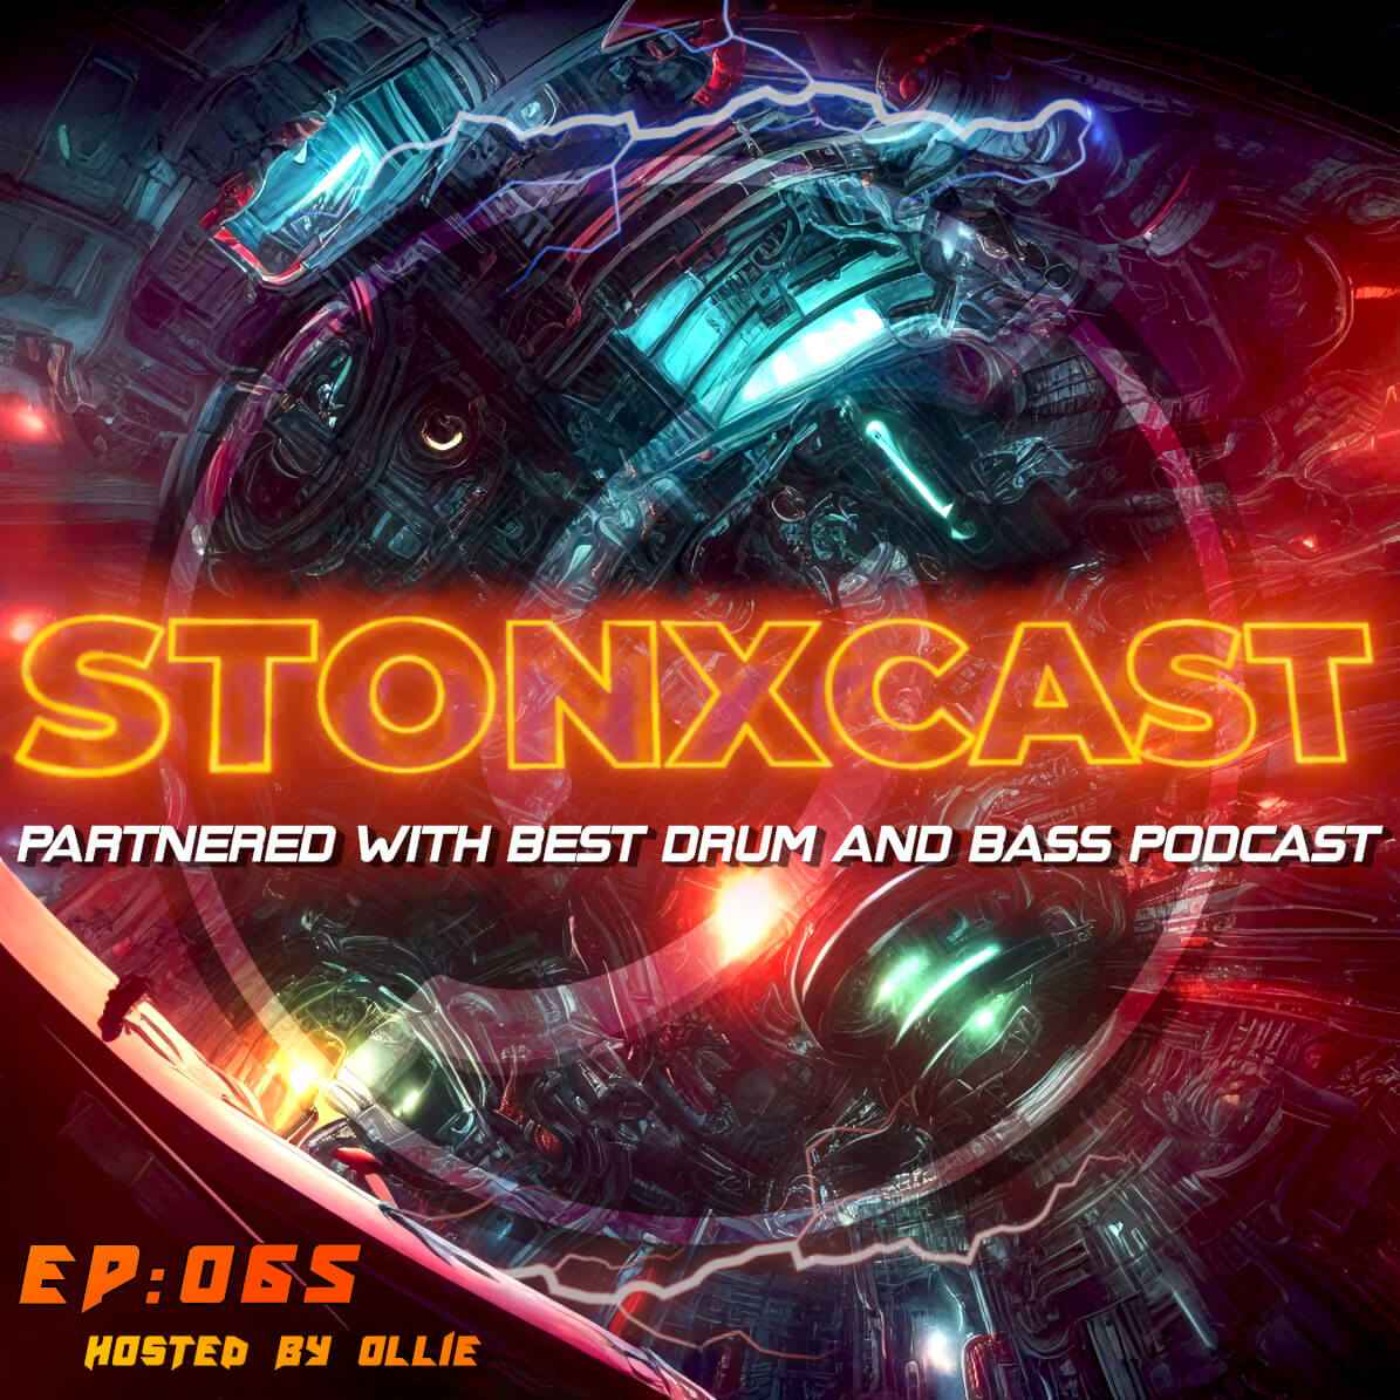 Stonxcast EP:065 - Hosted by Ollie Artwork